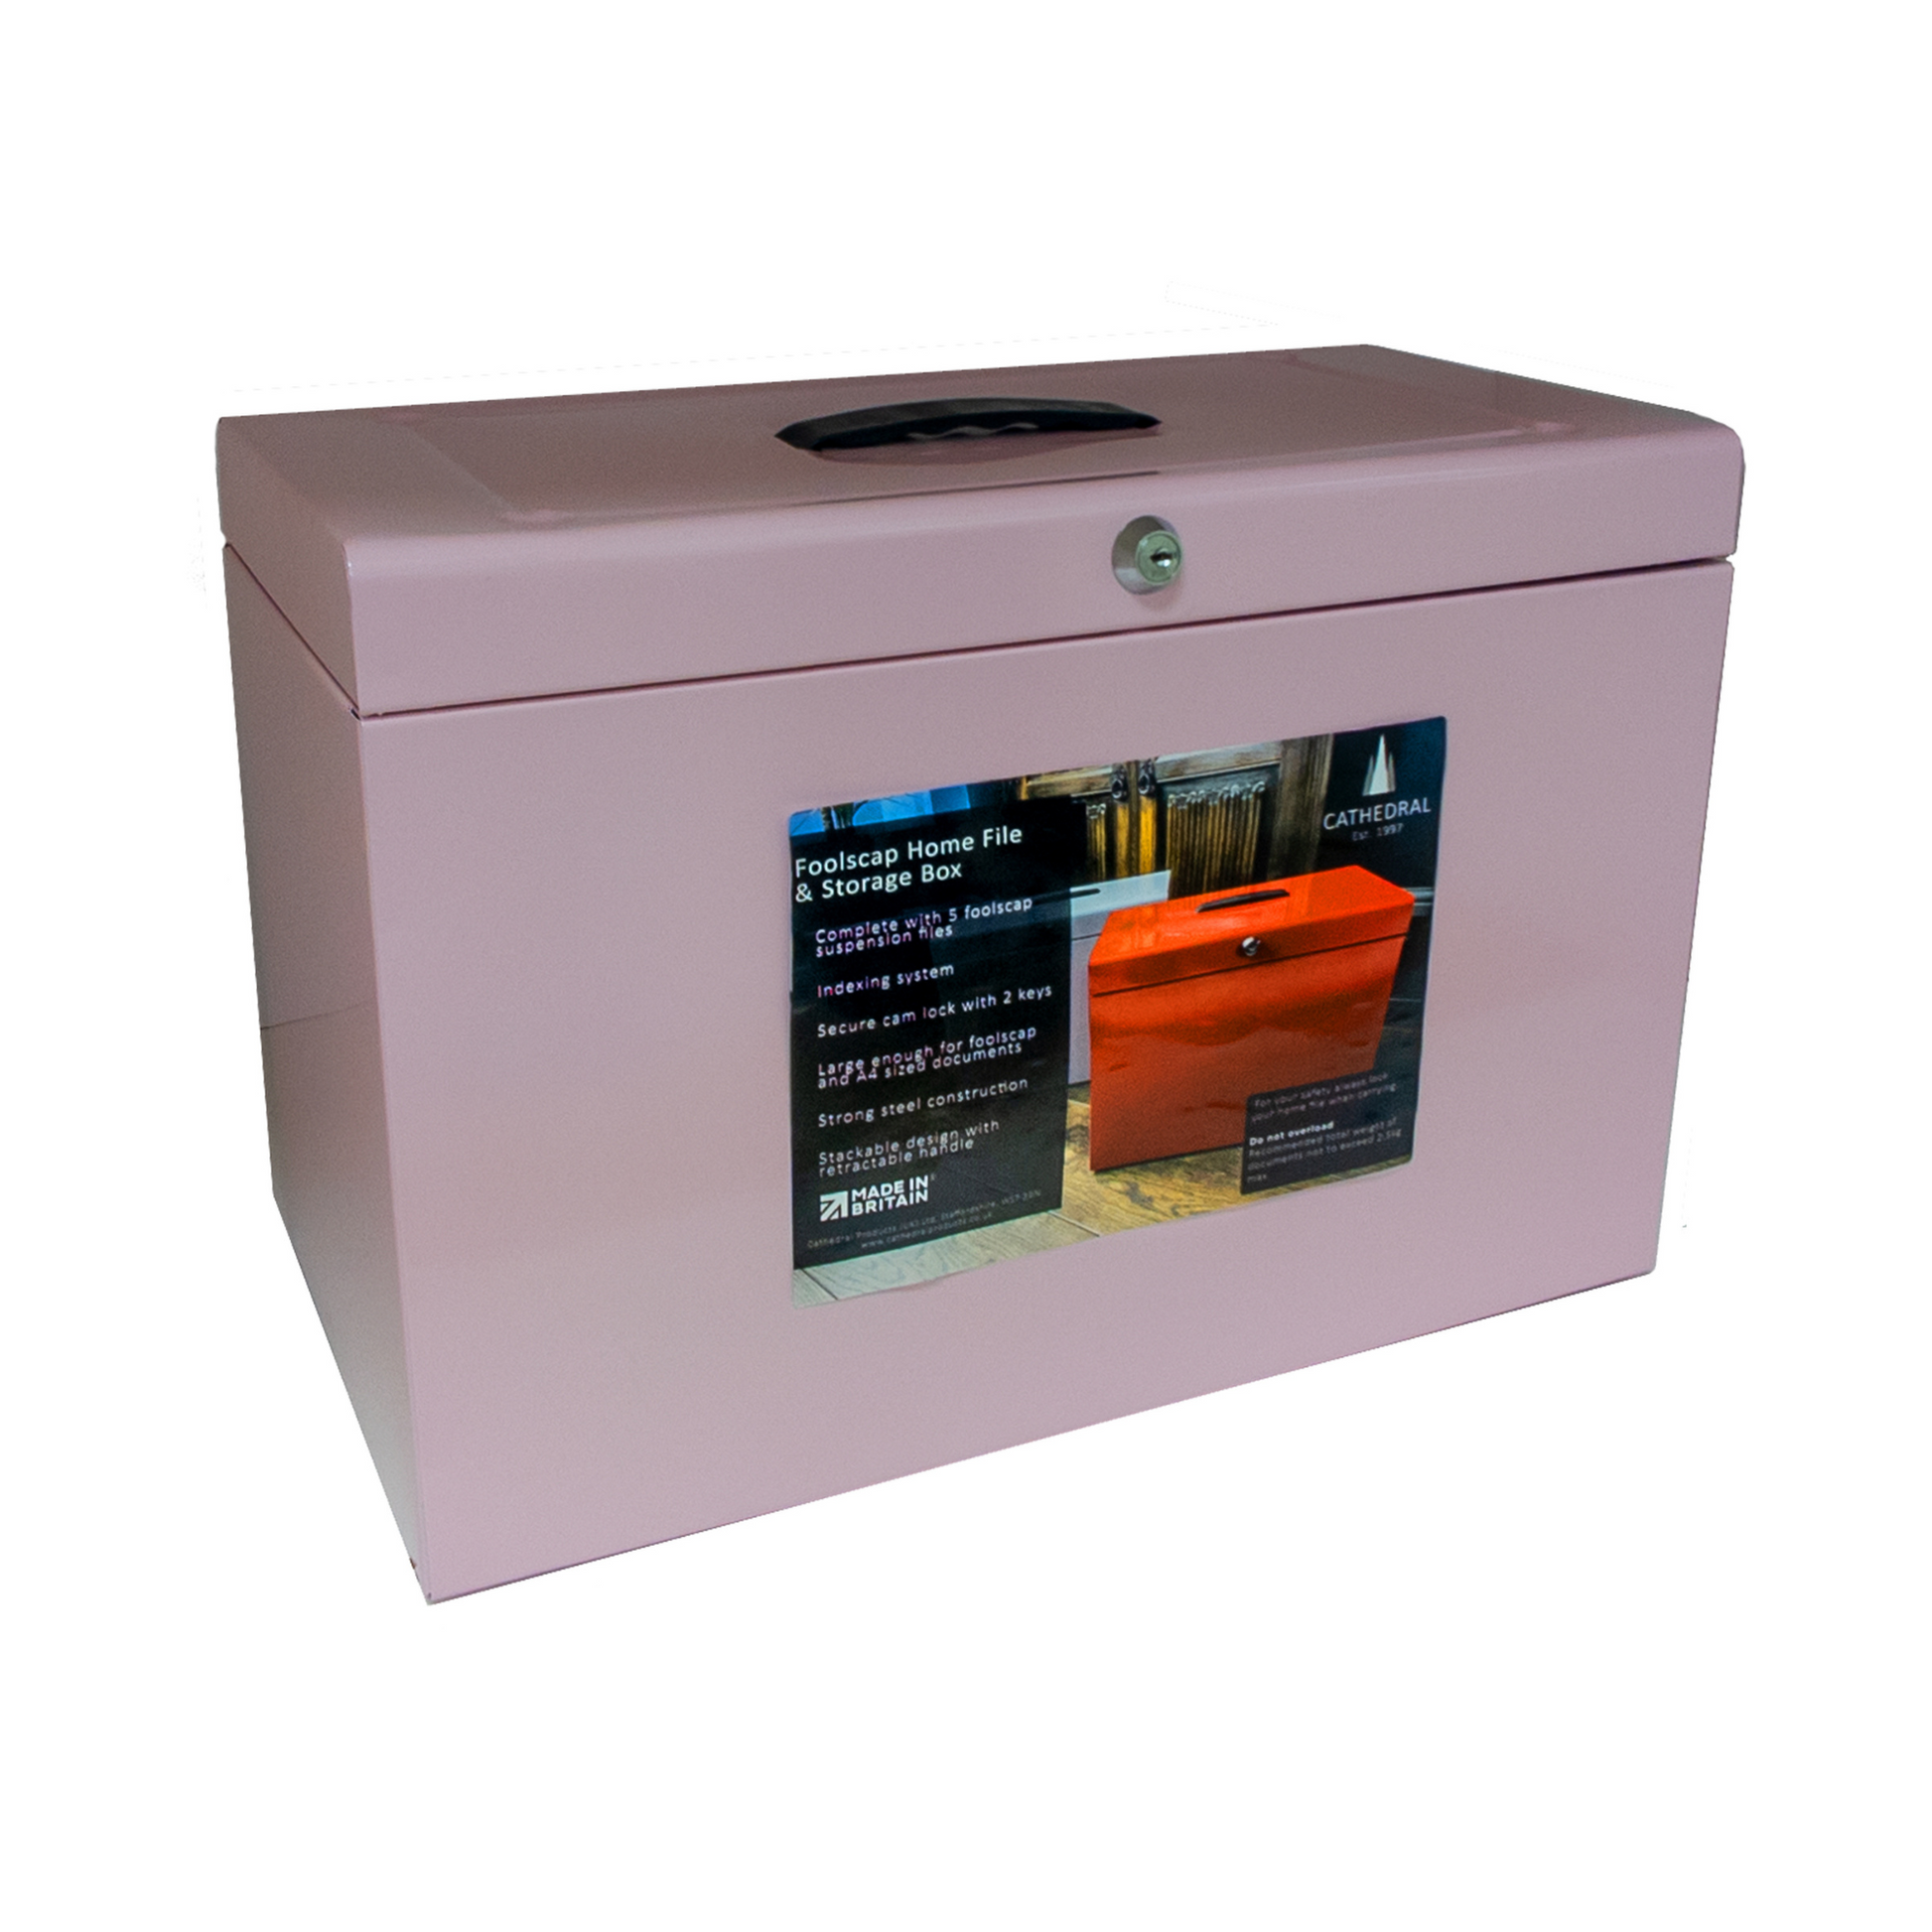 A pastel pink A4+ (Foolscap) steel home file box with a lock and key in the front and a carrying handle on top, comes with five suspension files included.